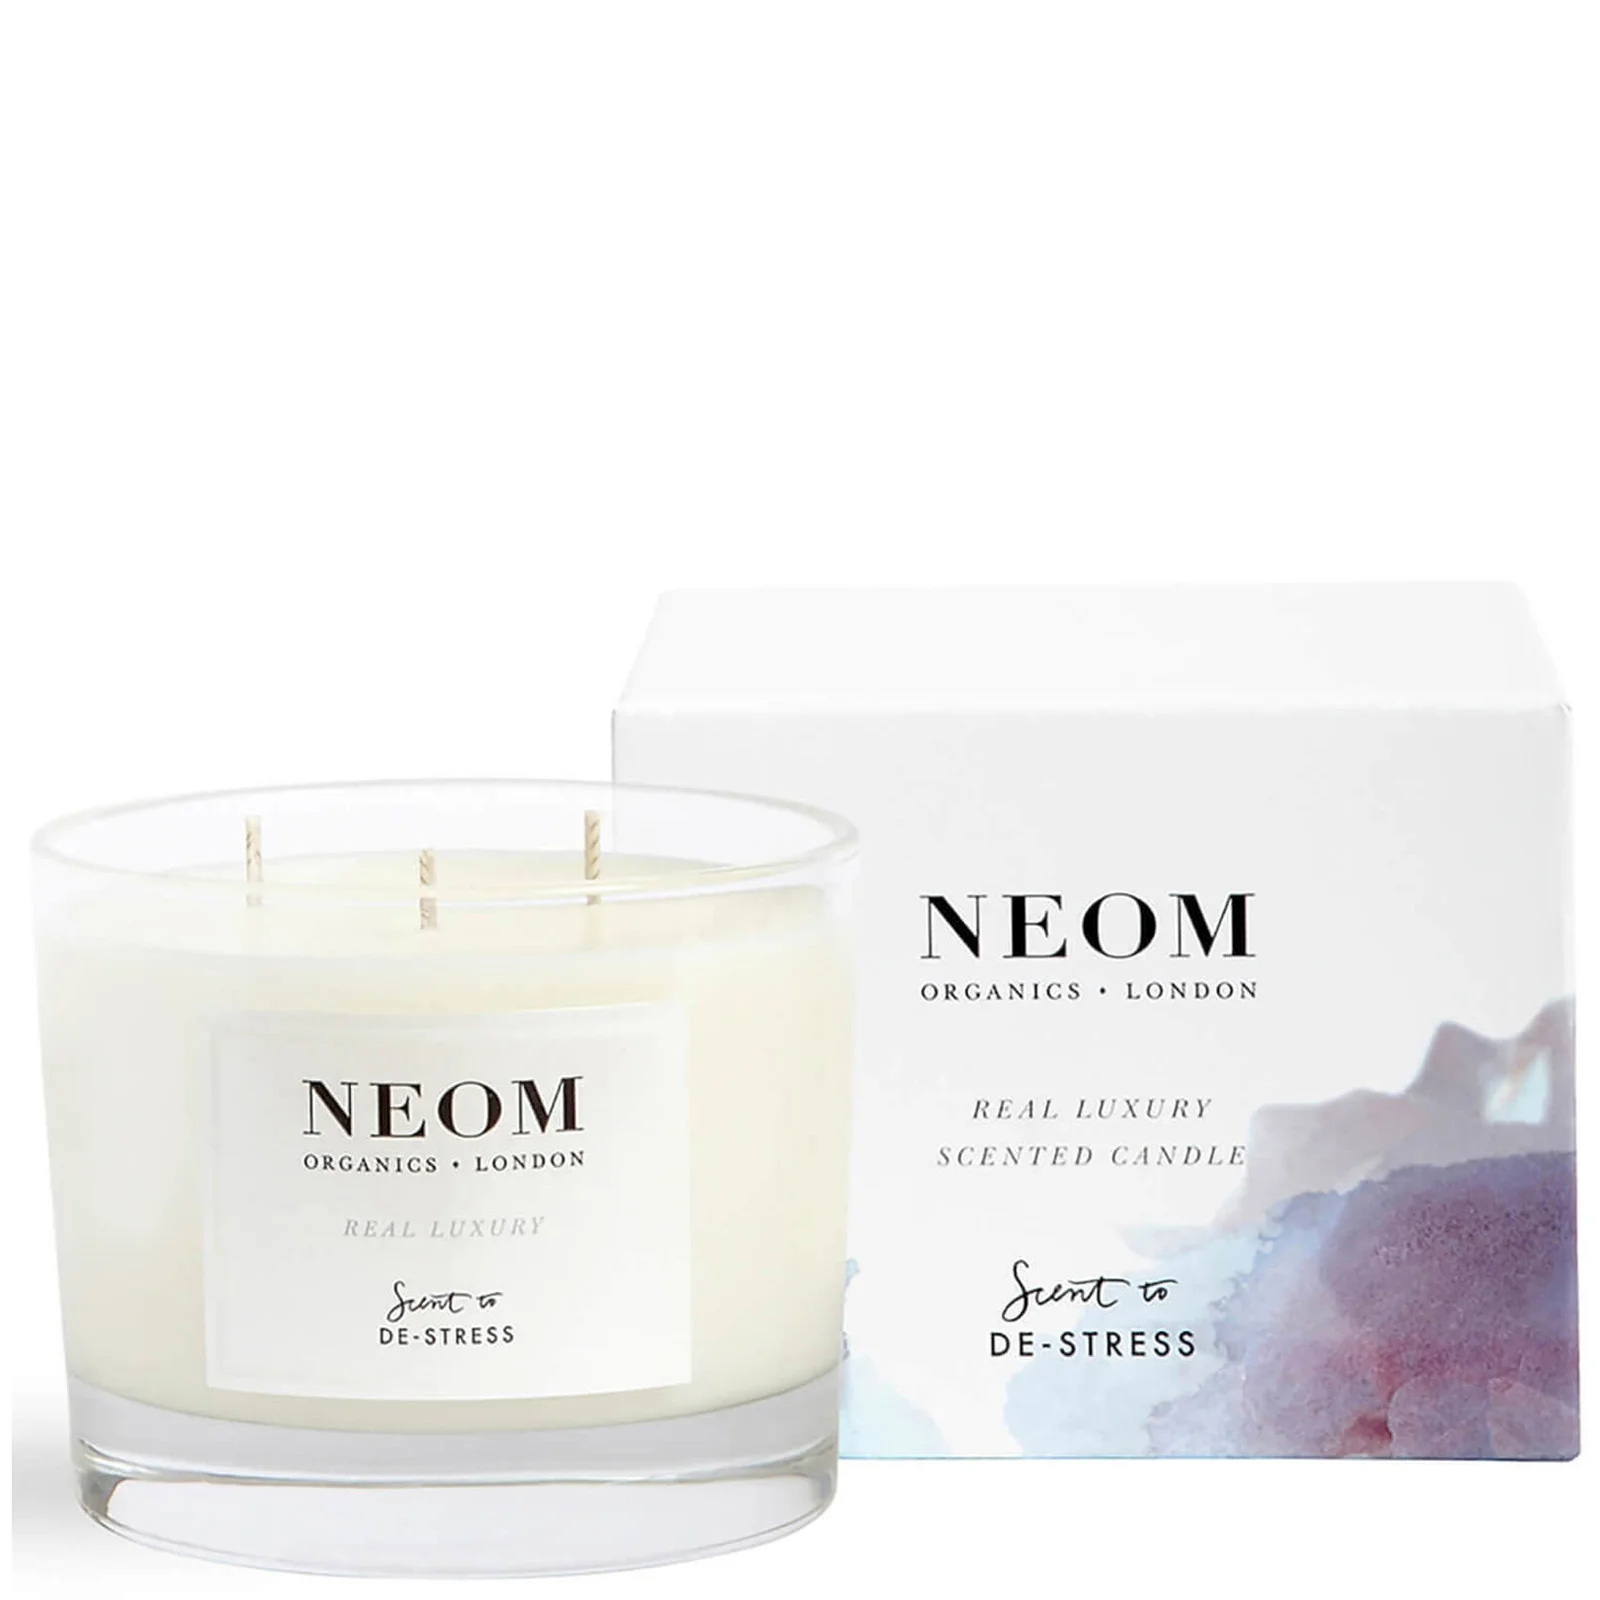 NEOM Real Luxury De-Stress Scented 3 Wick Candle Image 1